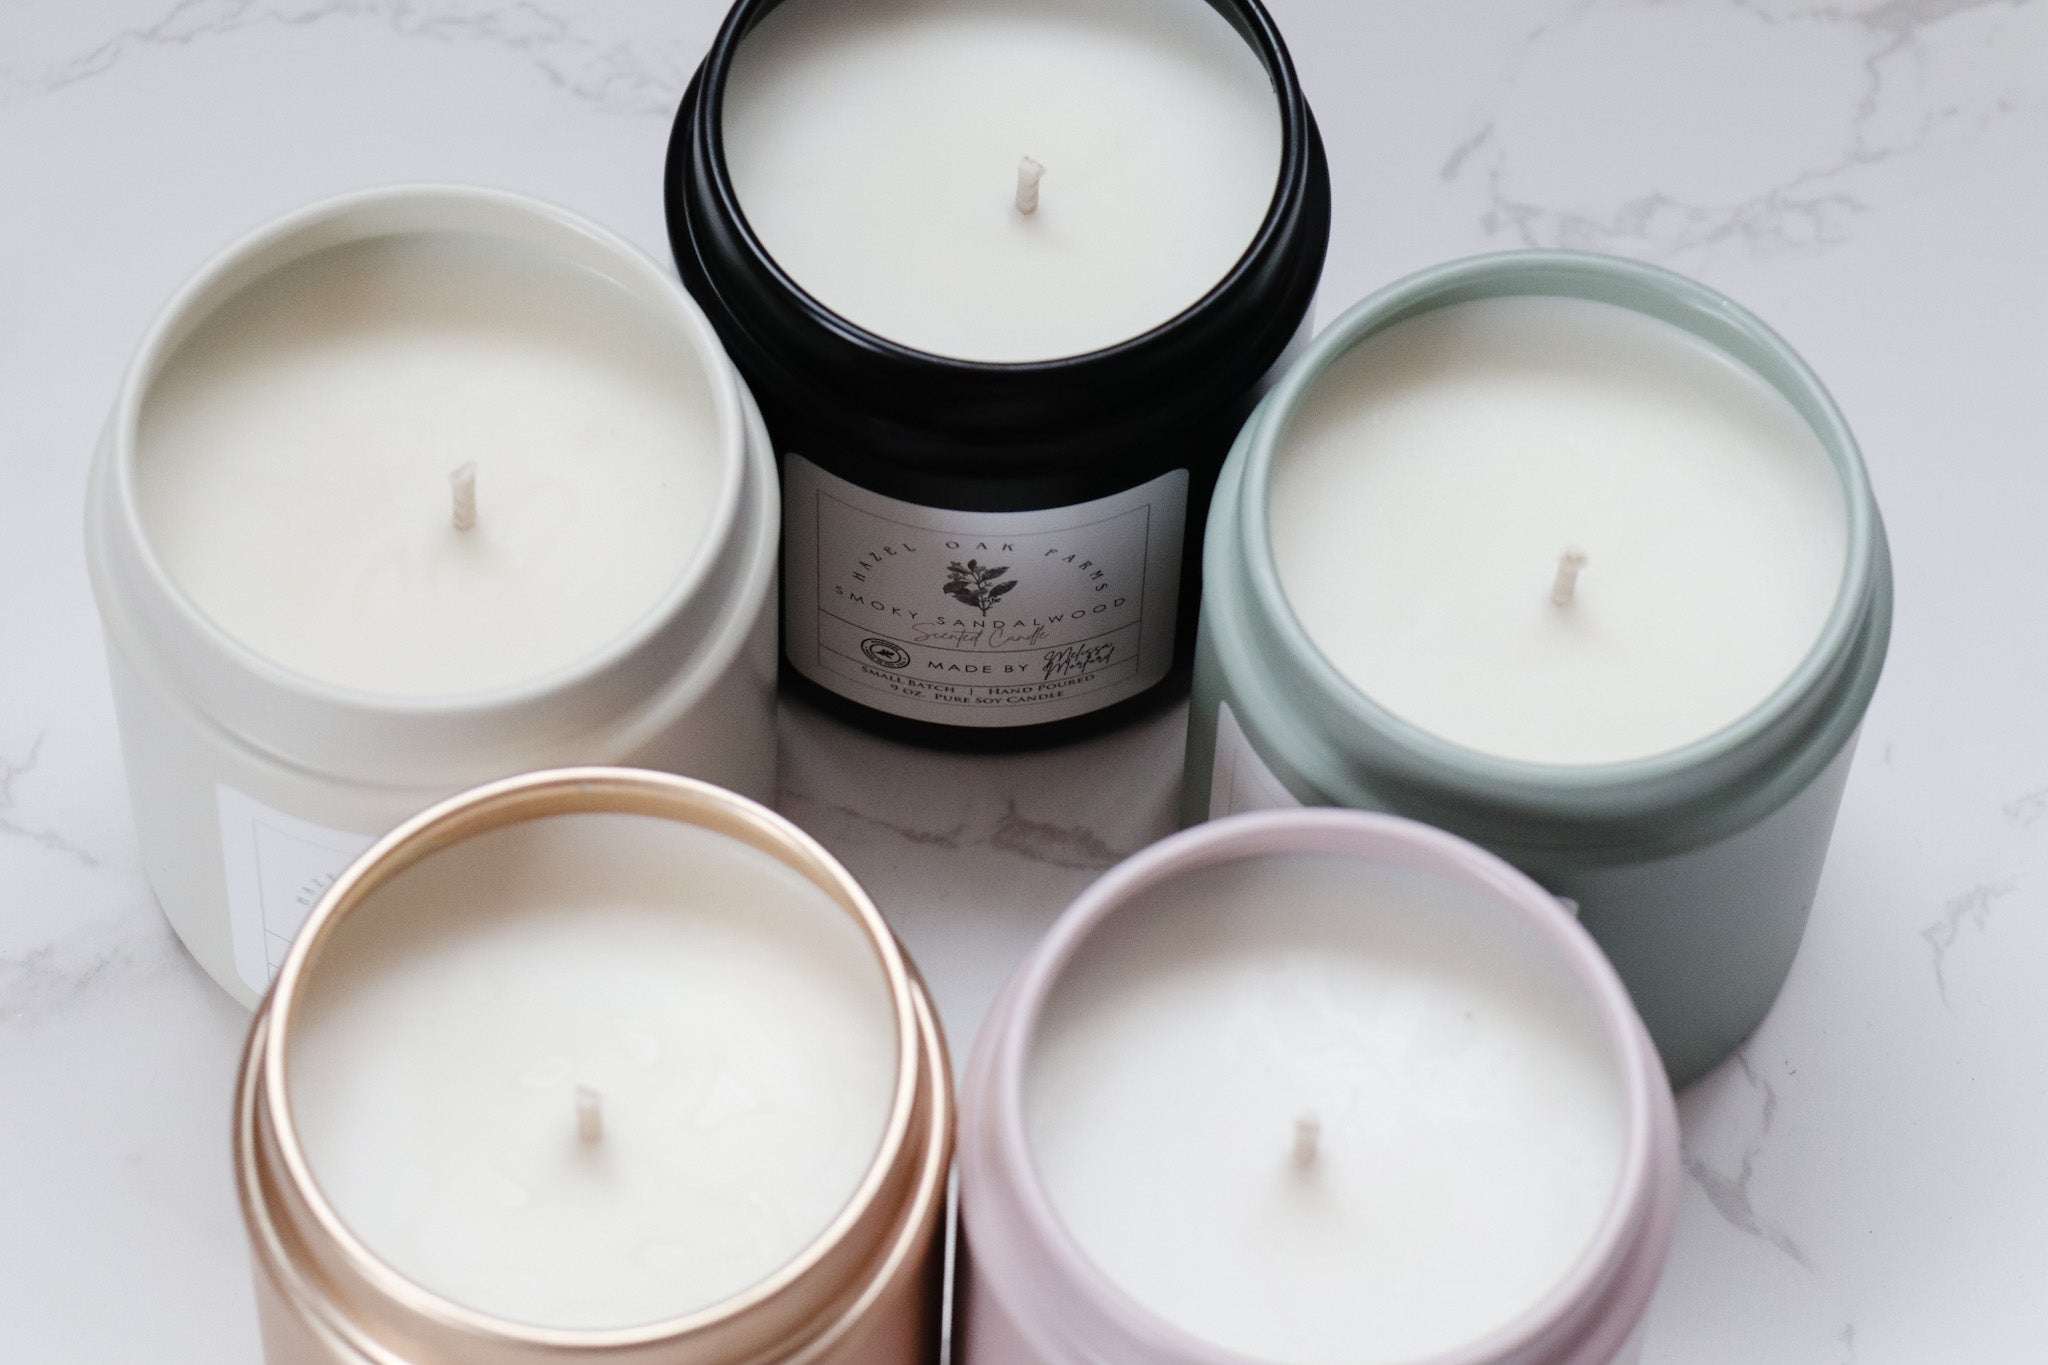 Lilac and Linen - Melissa&#39;s Pure Soy Candles (in stock) - Hazel Oak Farms